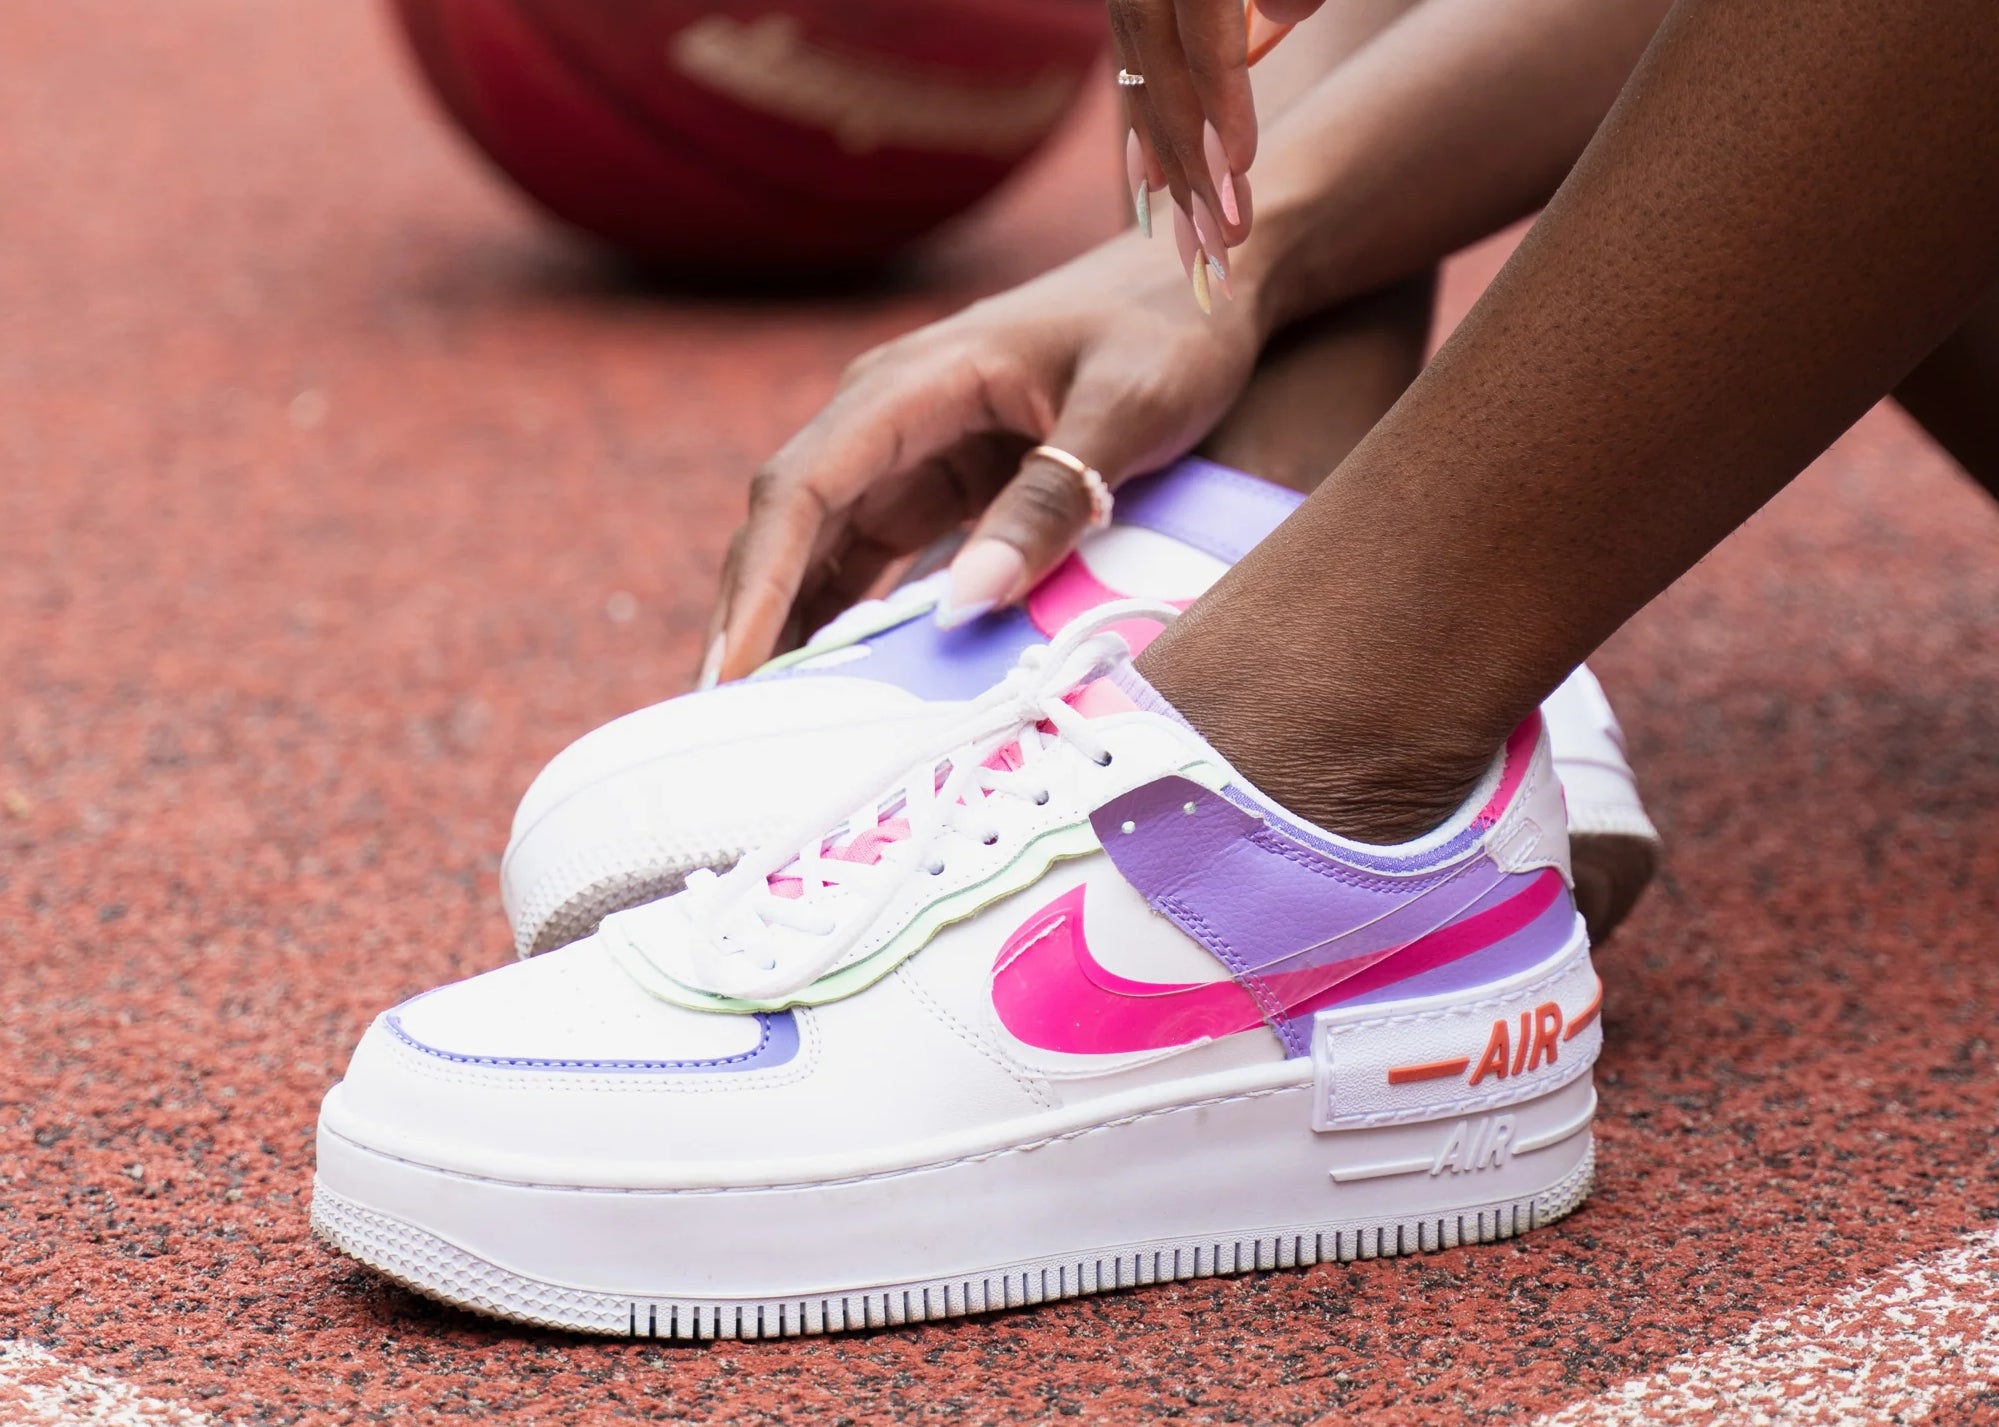 A close up of a woman wearing Nike sneakers